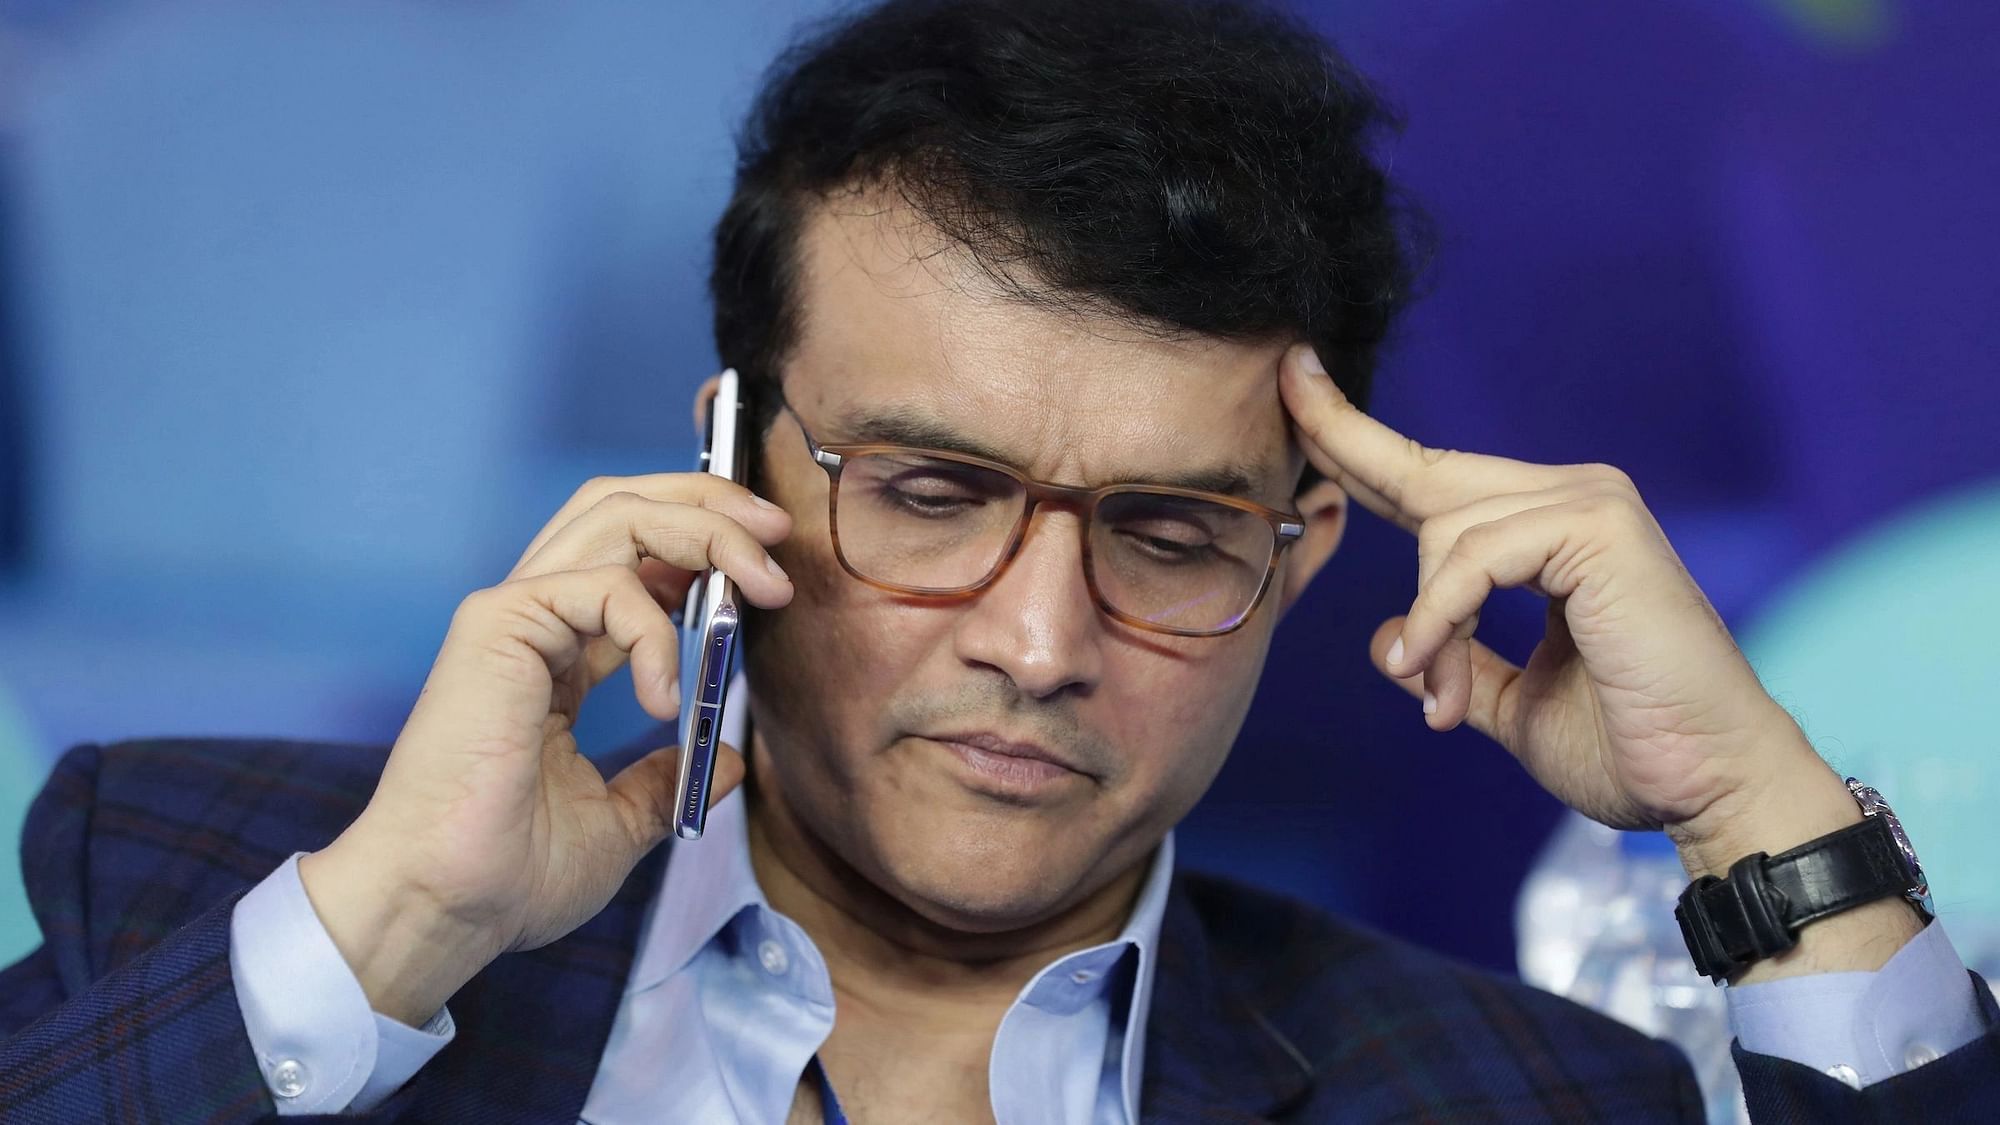 <div class="paragraphs"><p>BCCI President Sourav Ganguly on Thursday informed that the 2022 edition of the Asia Cup, which was scheduled to be held in Sri Lanka, has now been shifted to the UAE.</p></div>